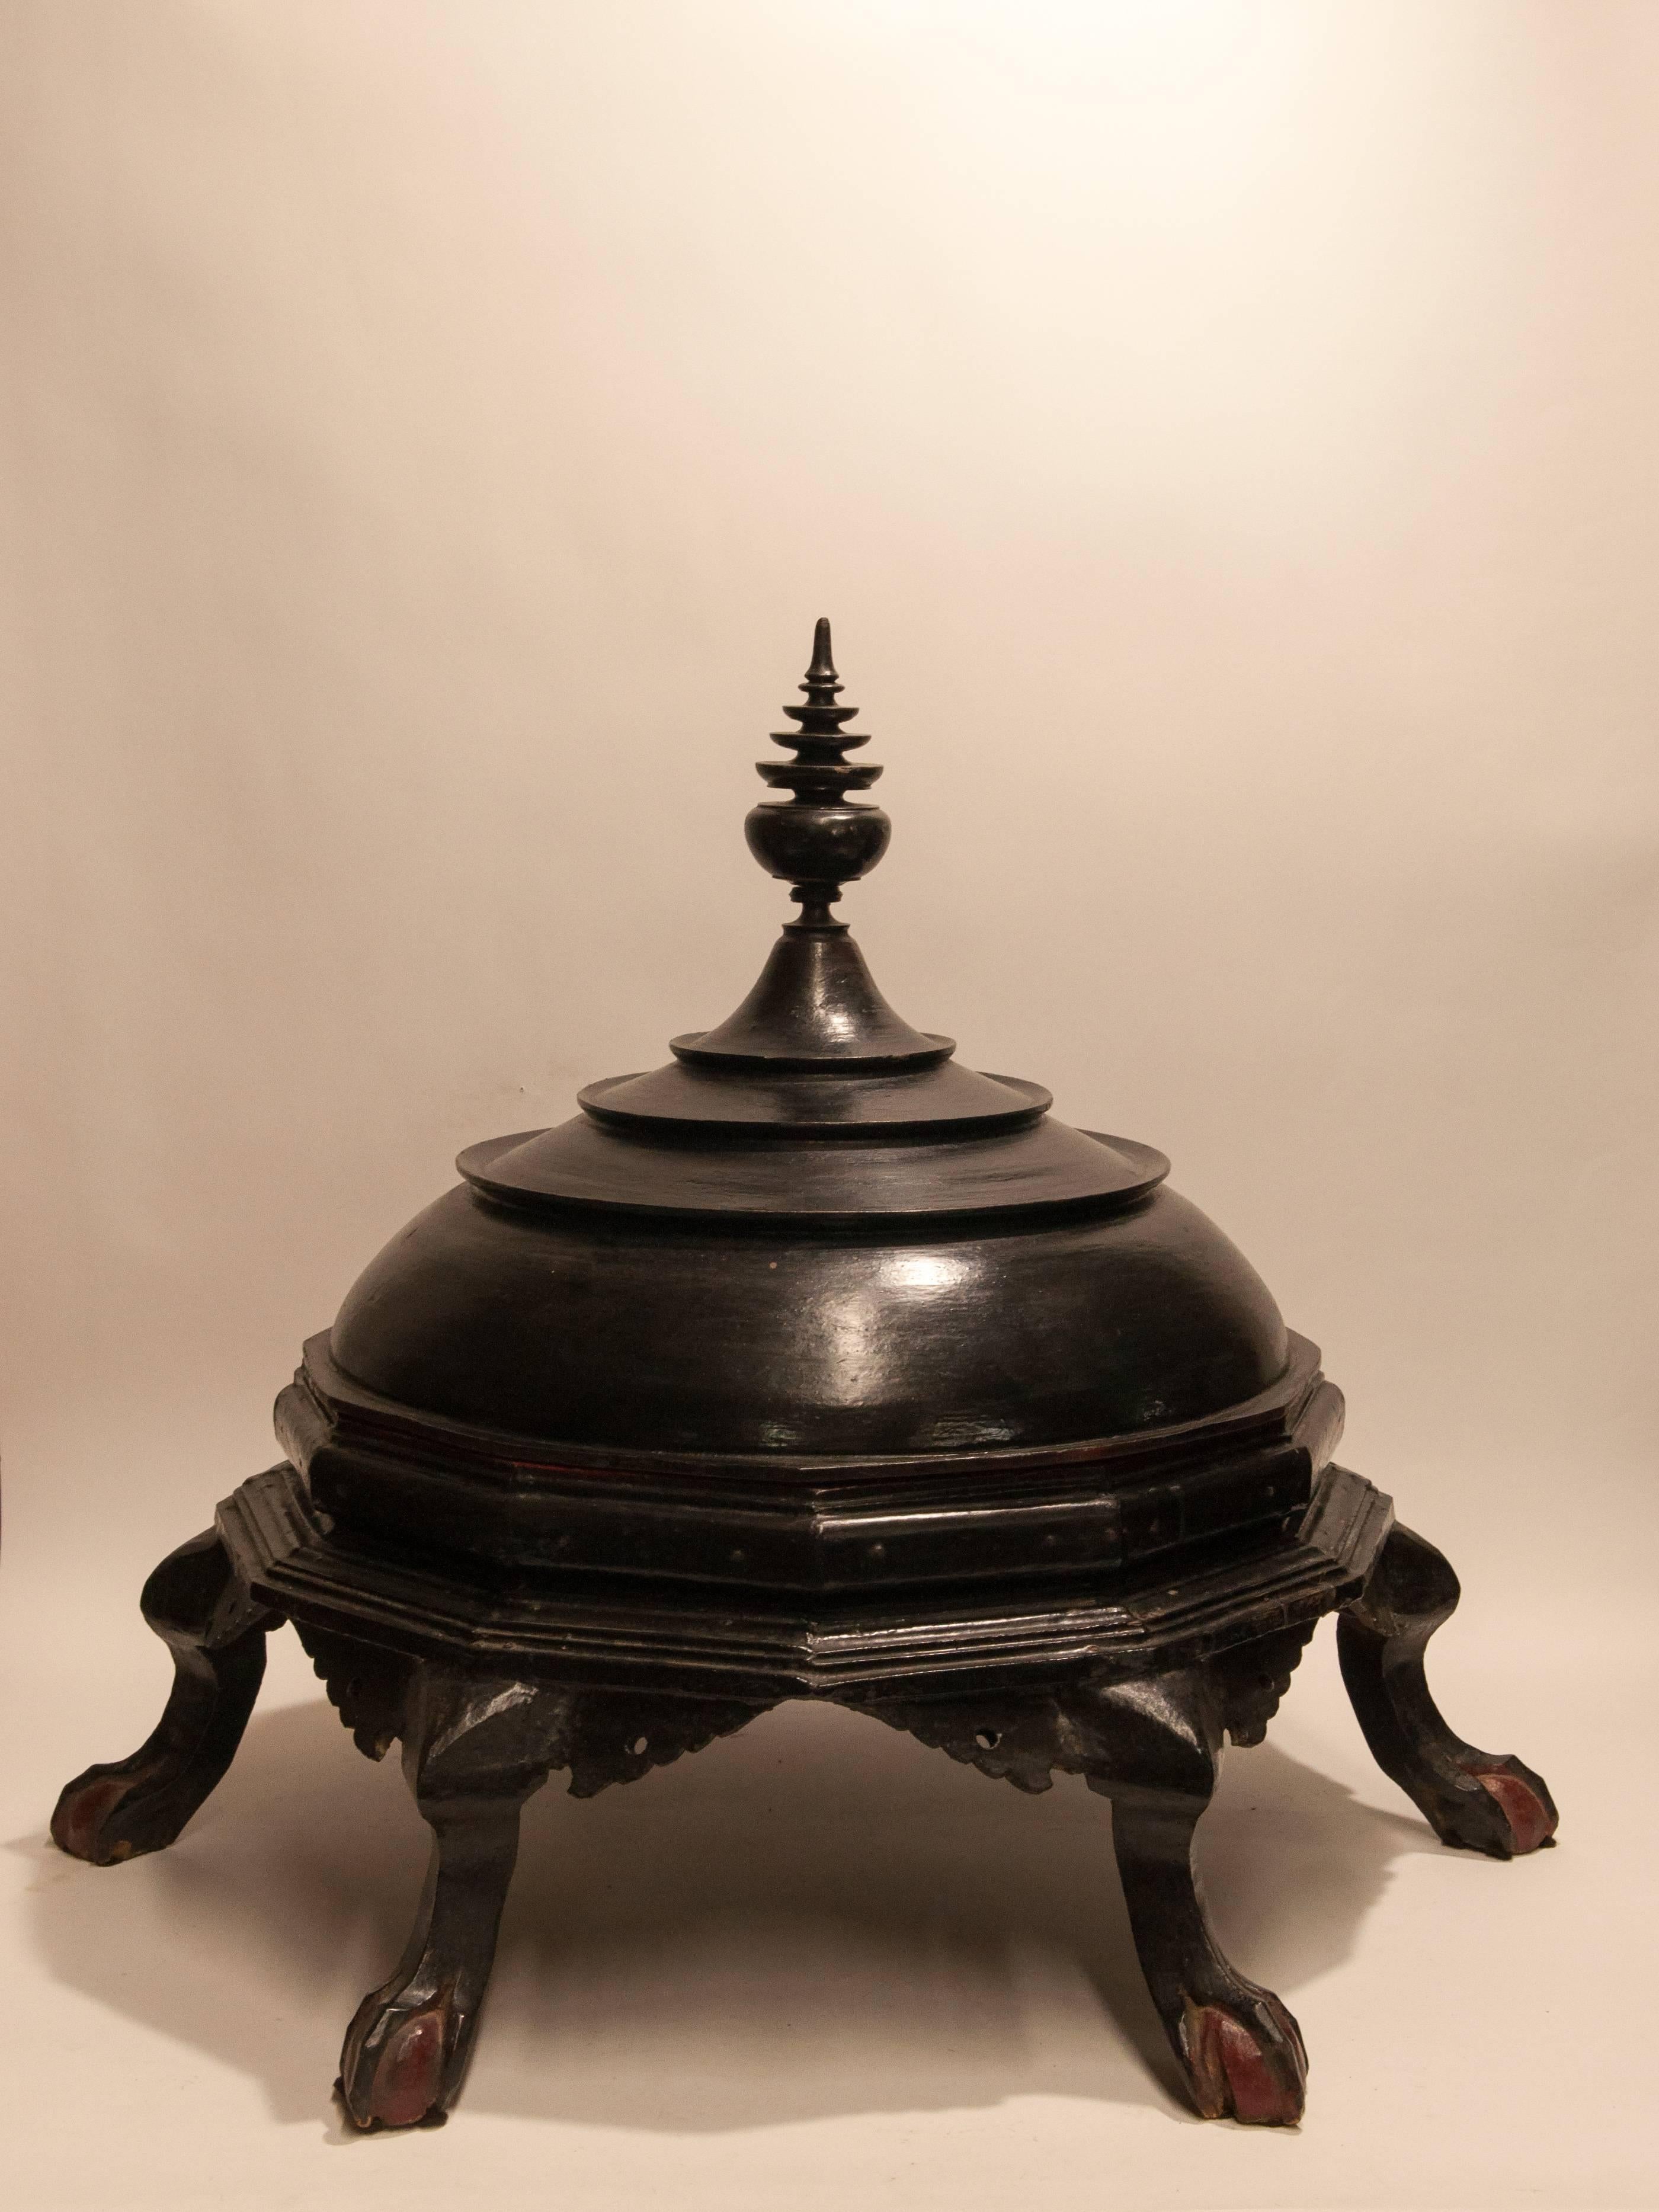 Bamboo Giant Black Lacquer Offering Tray, Hsun Ok, from Burma Early to Mid-20th Century